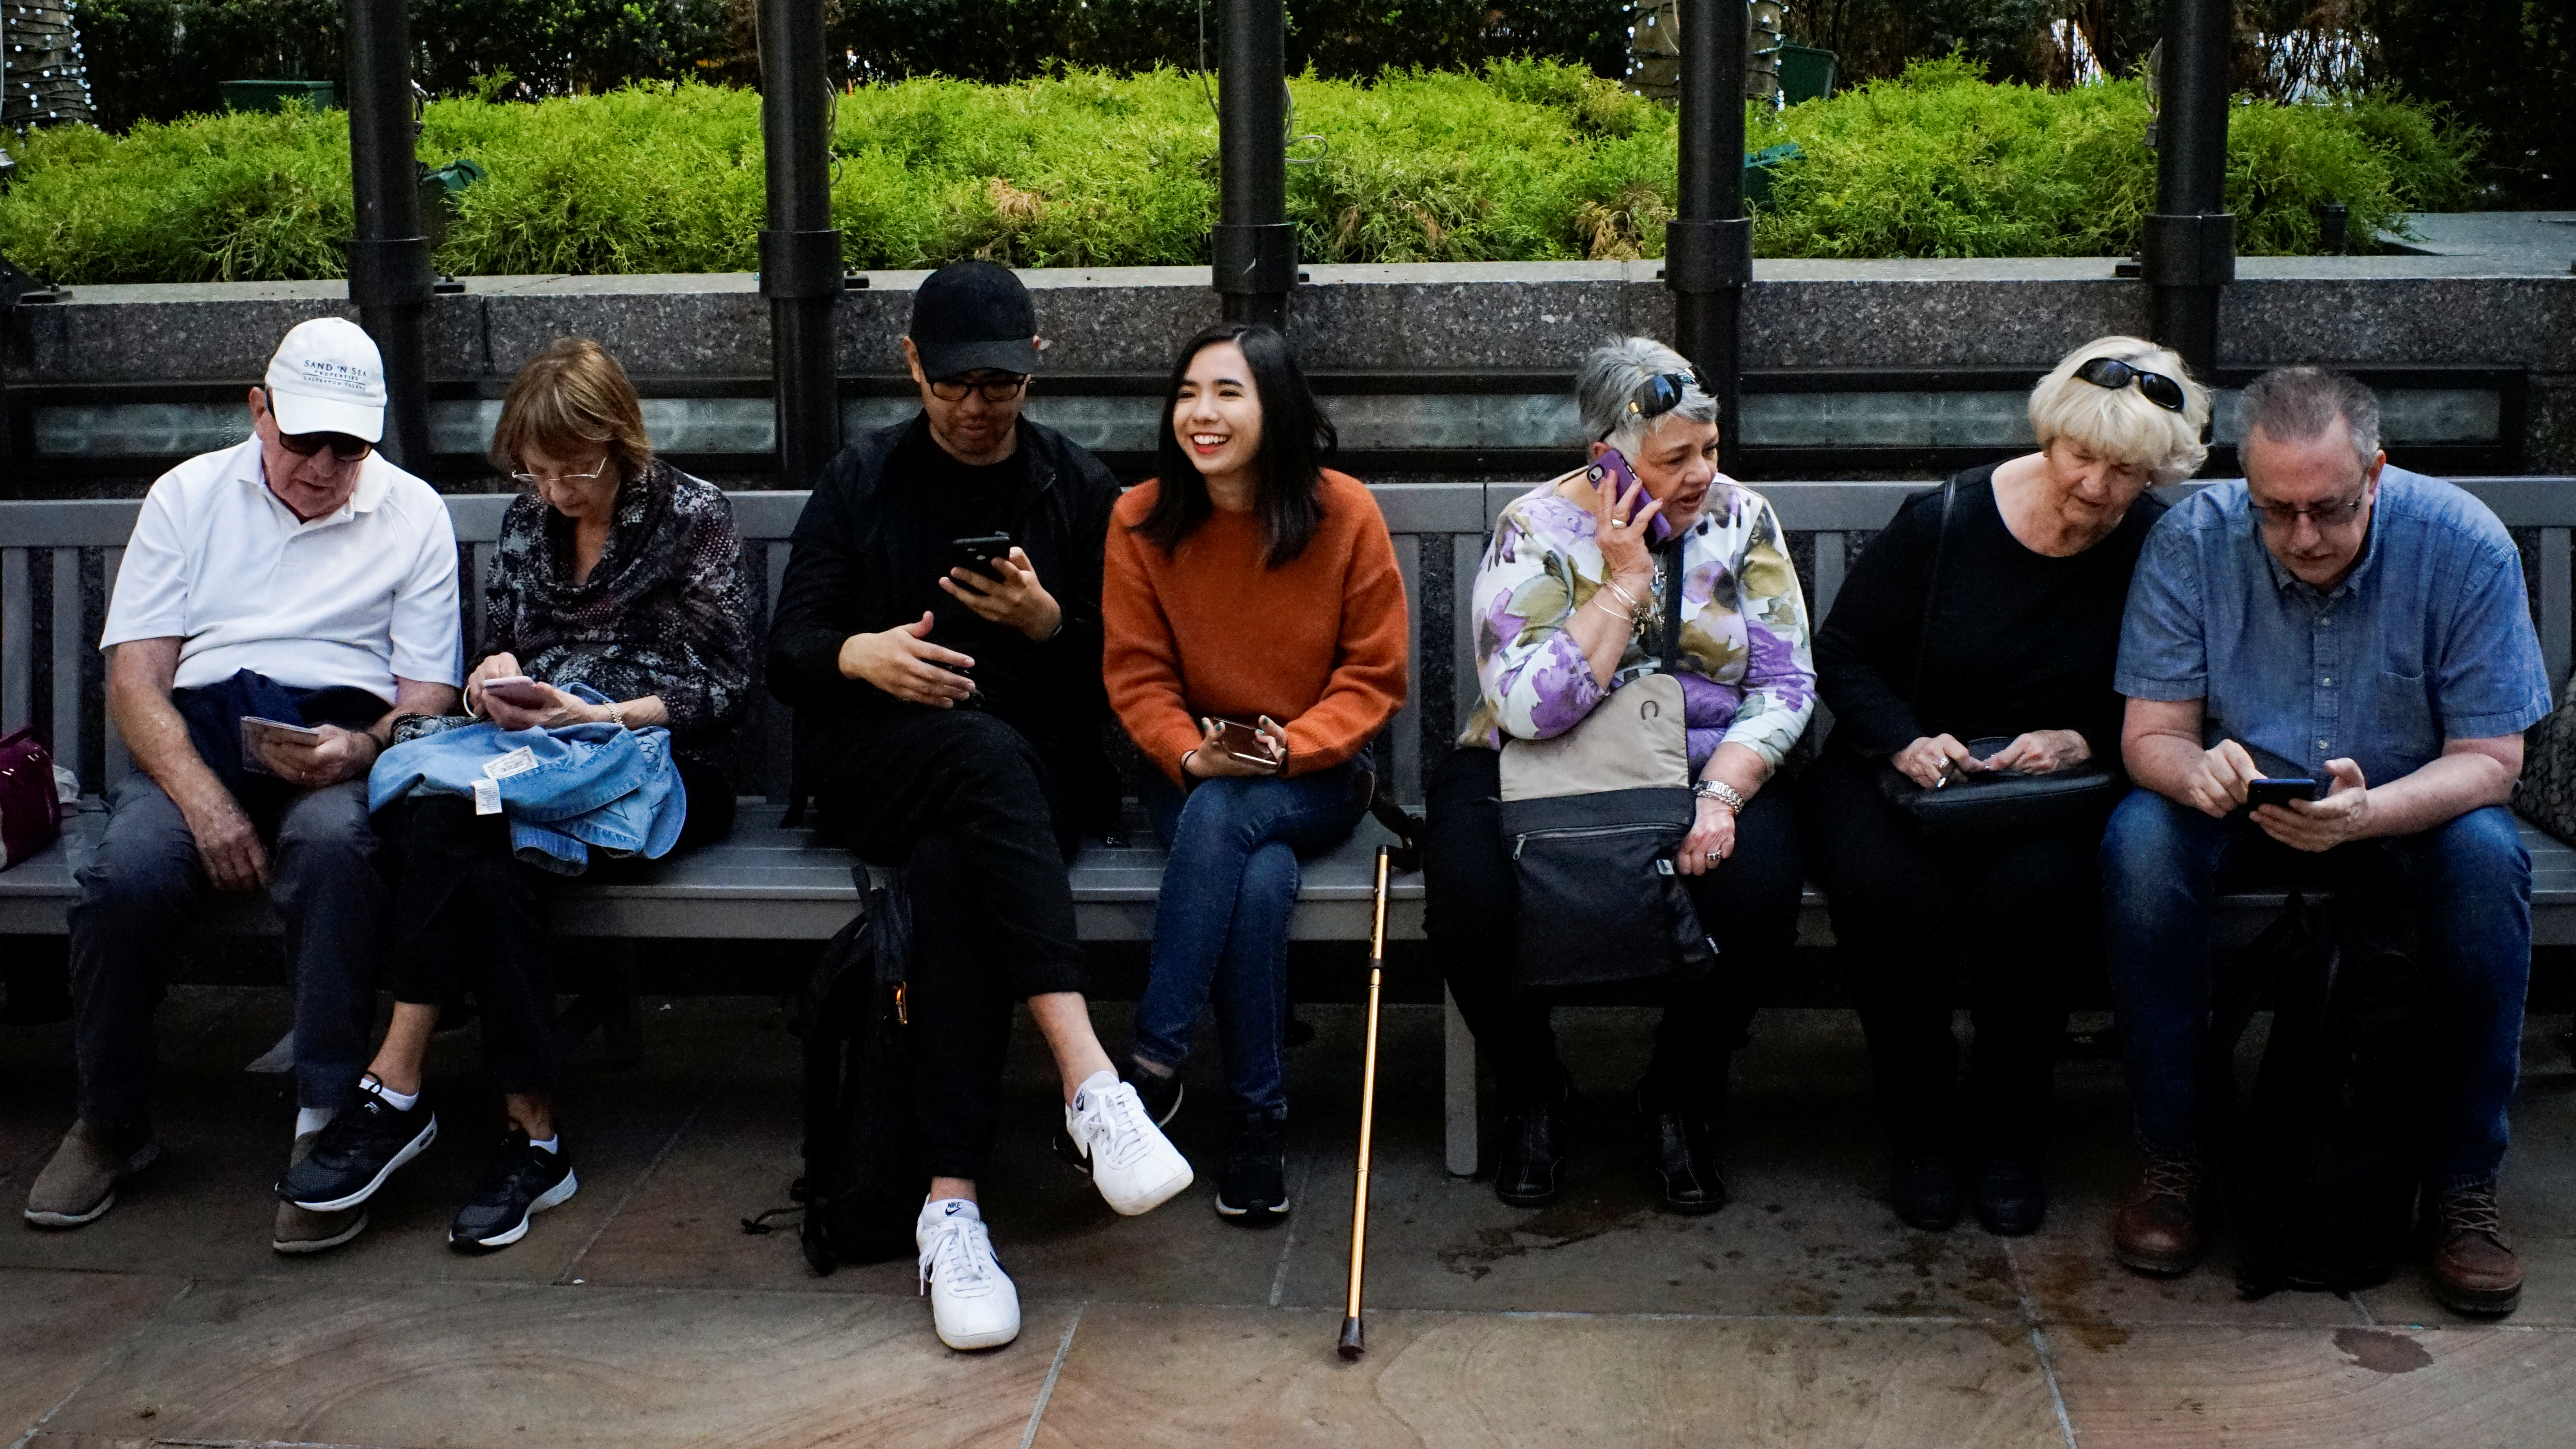 People look at their smartphones at the Rockefeller center in New York City